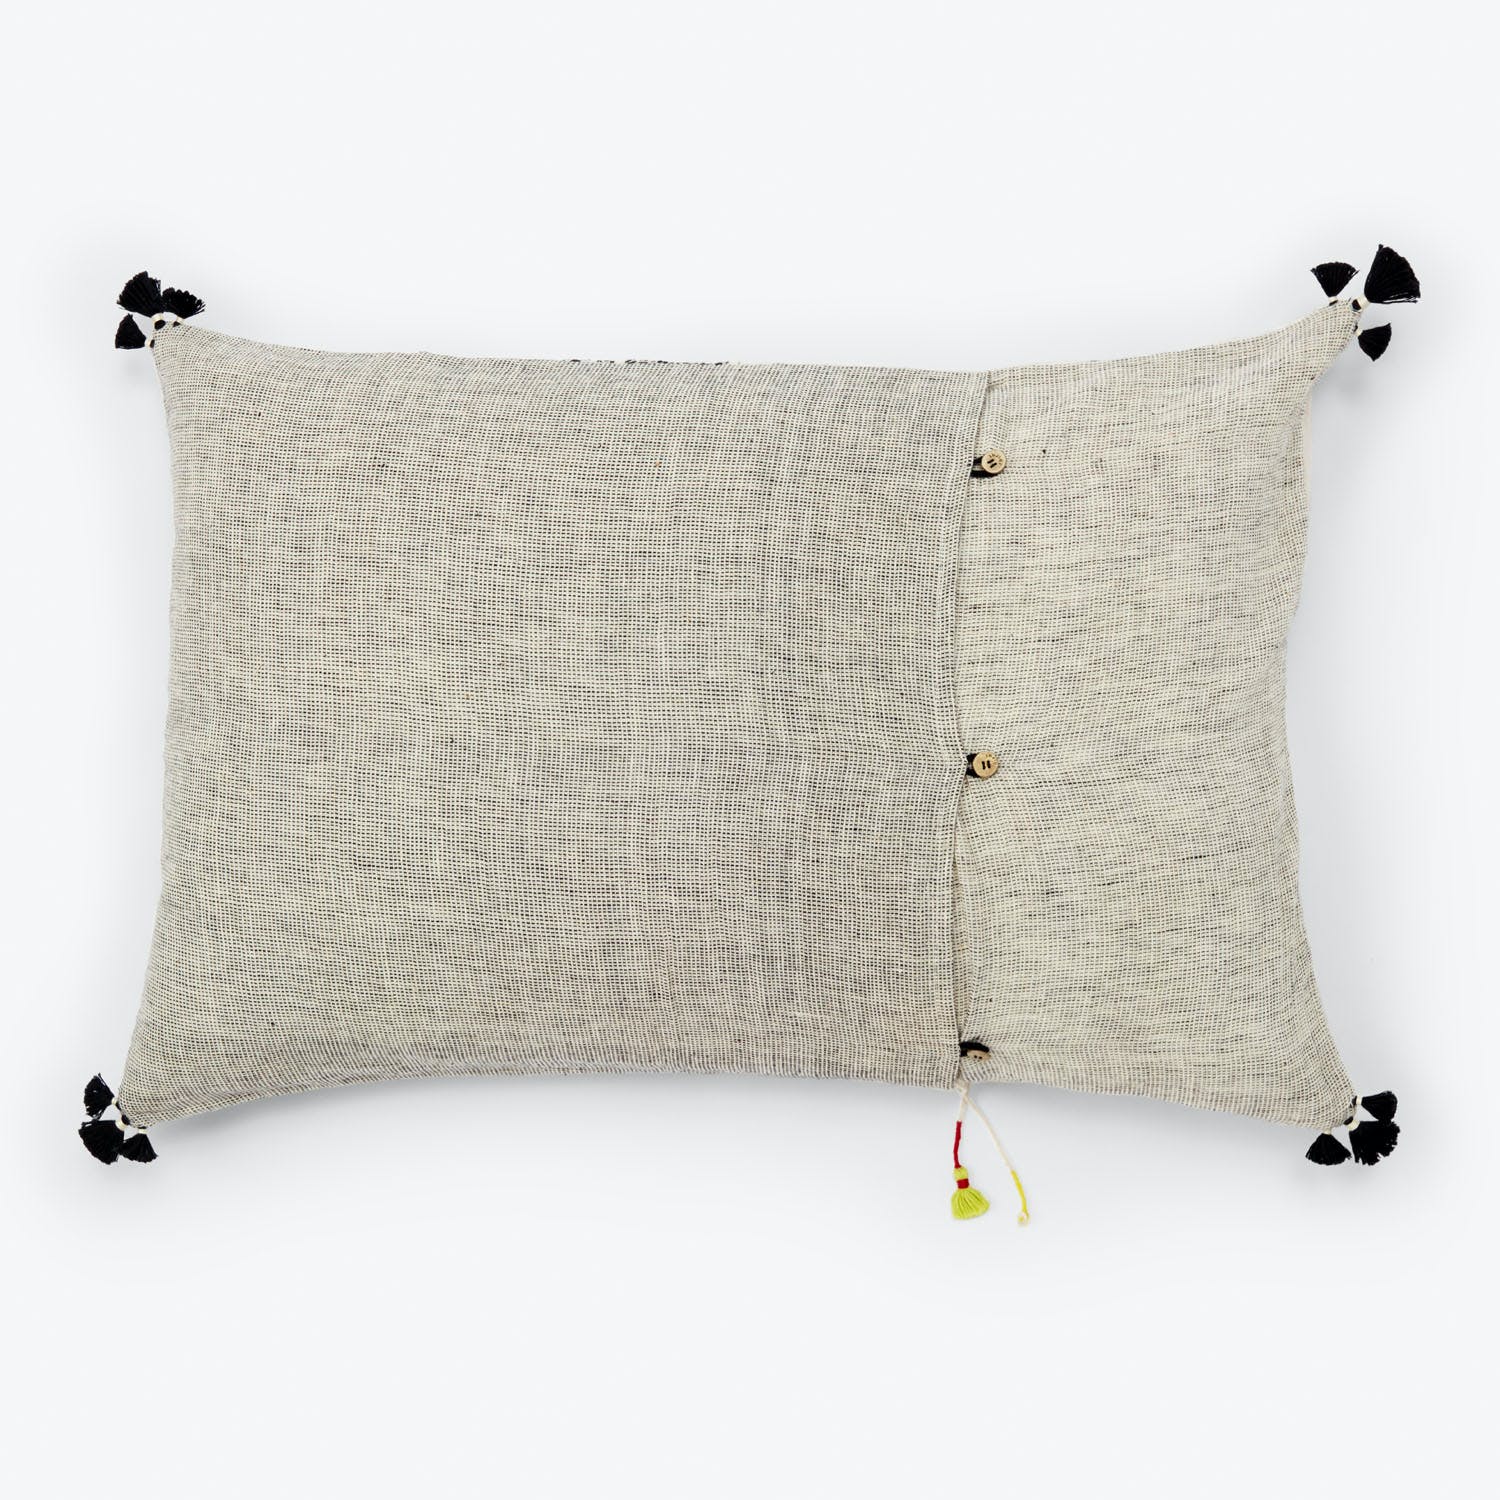 Rectangular decorative pillow in neutral tones with tassels and buttons.